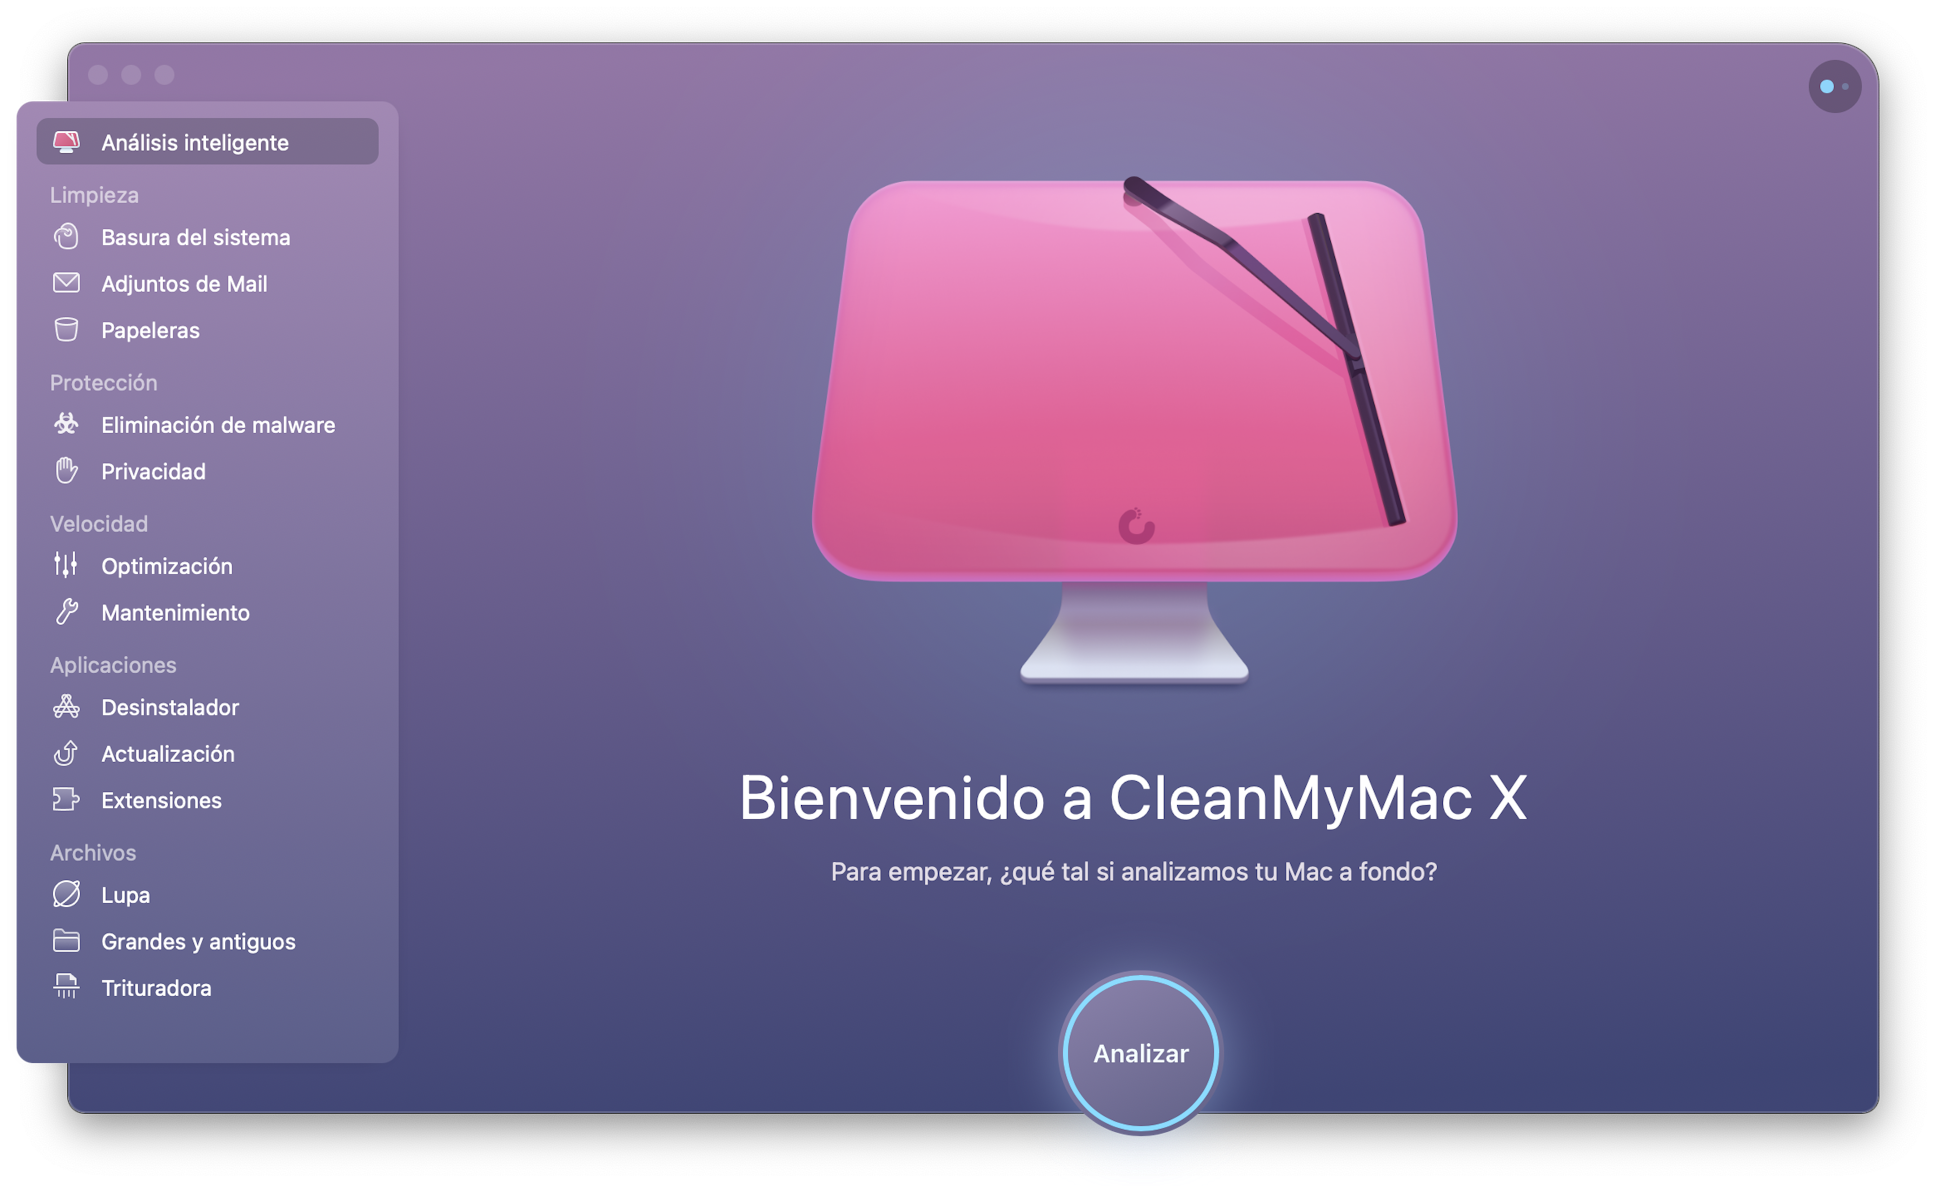 download cleanmymac x